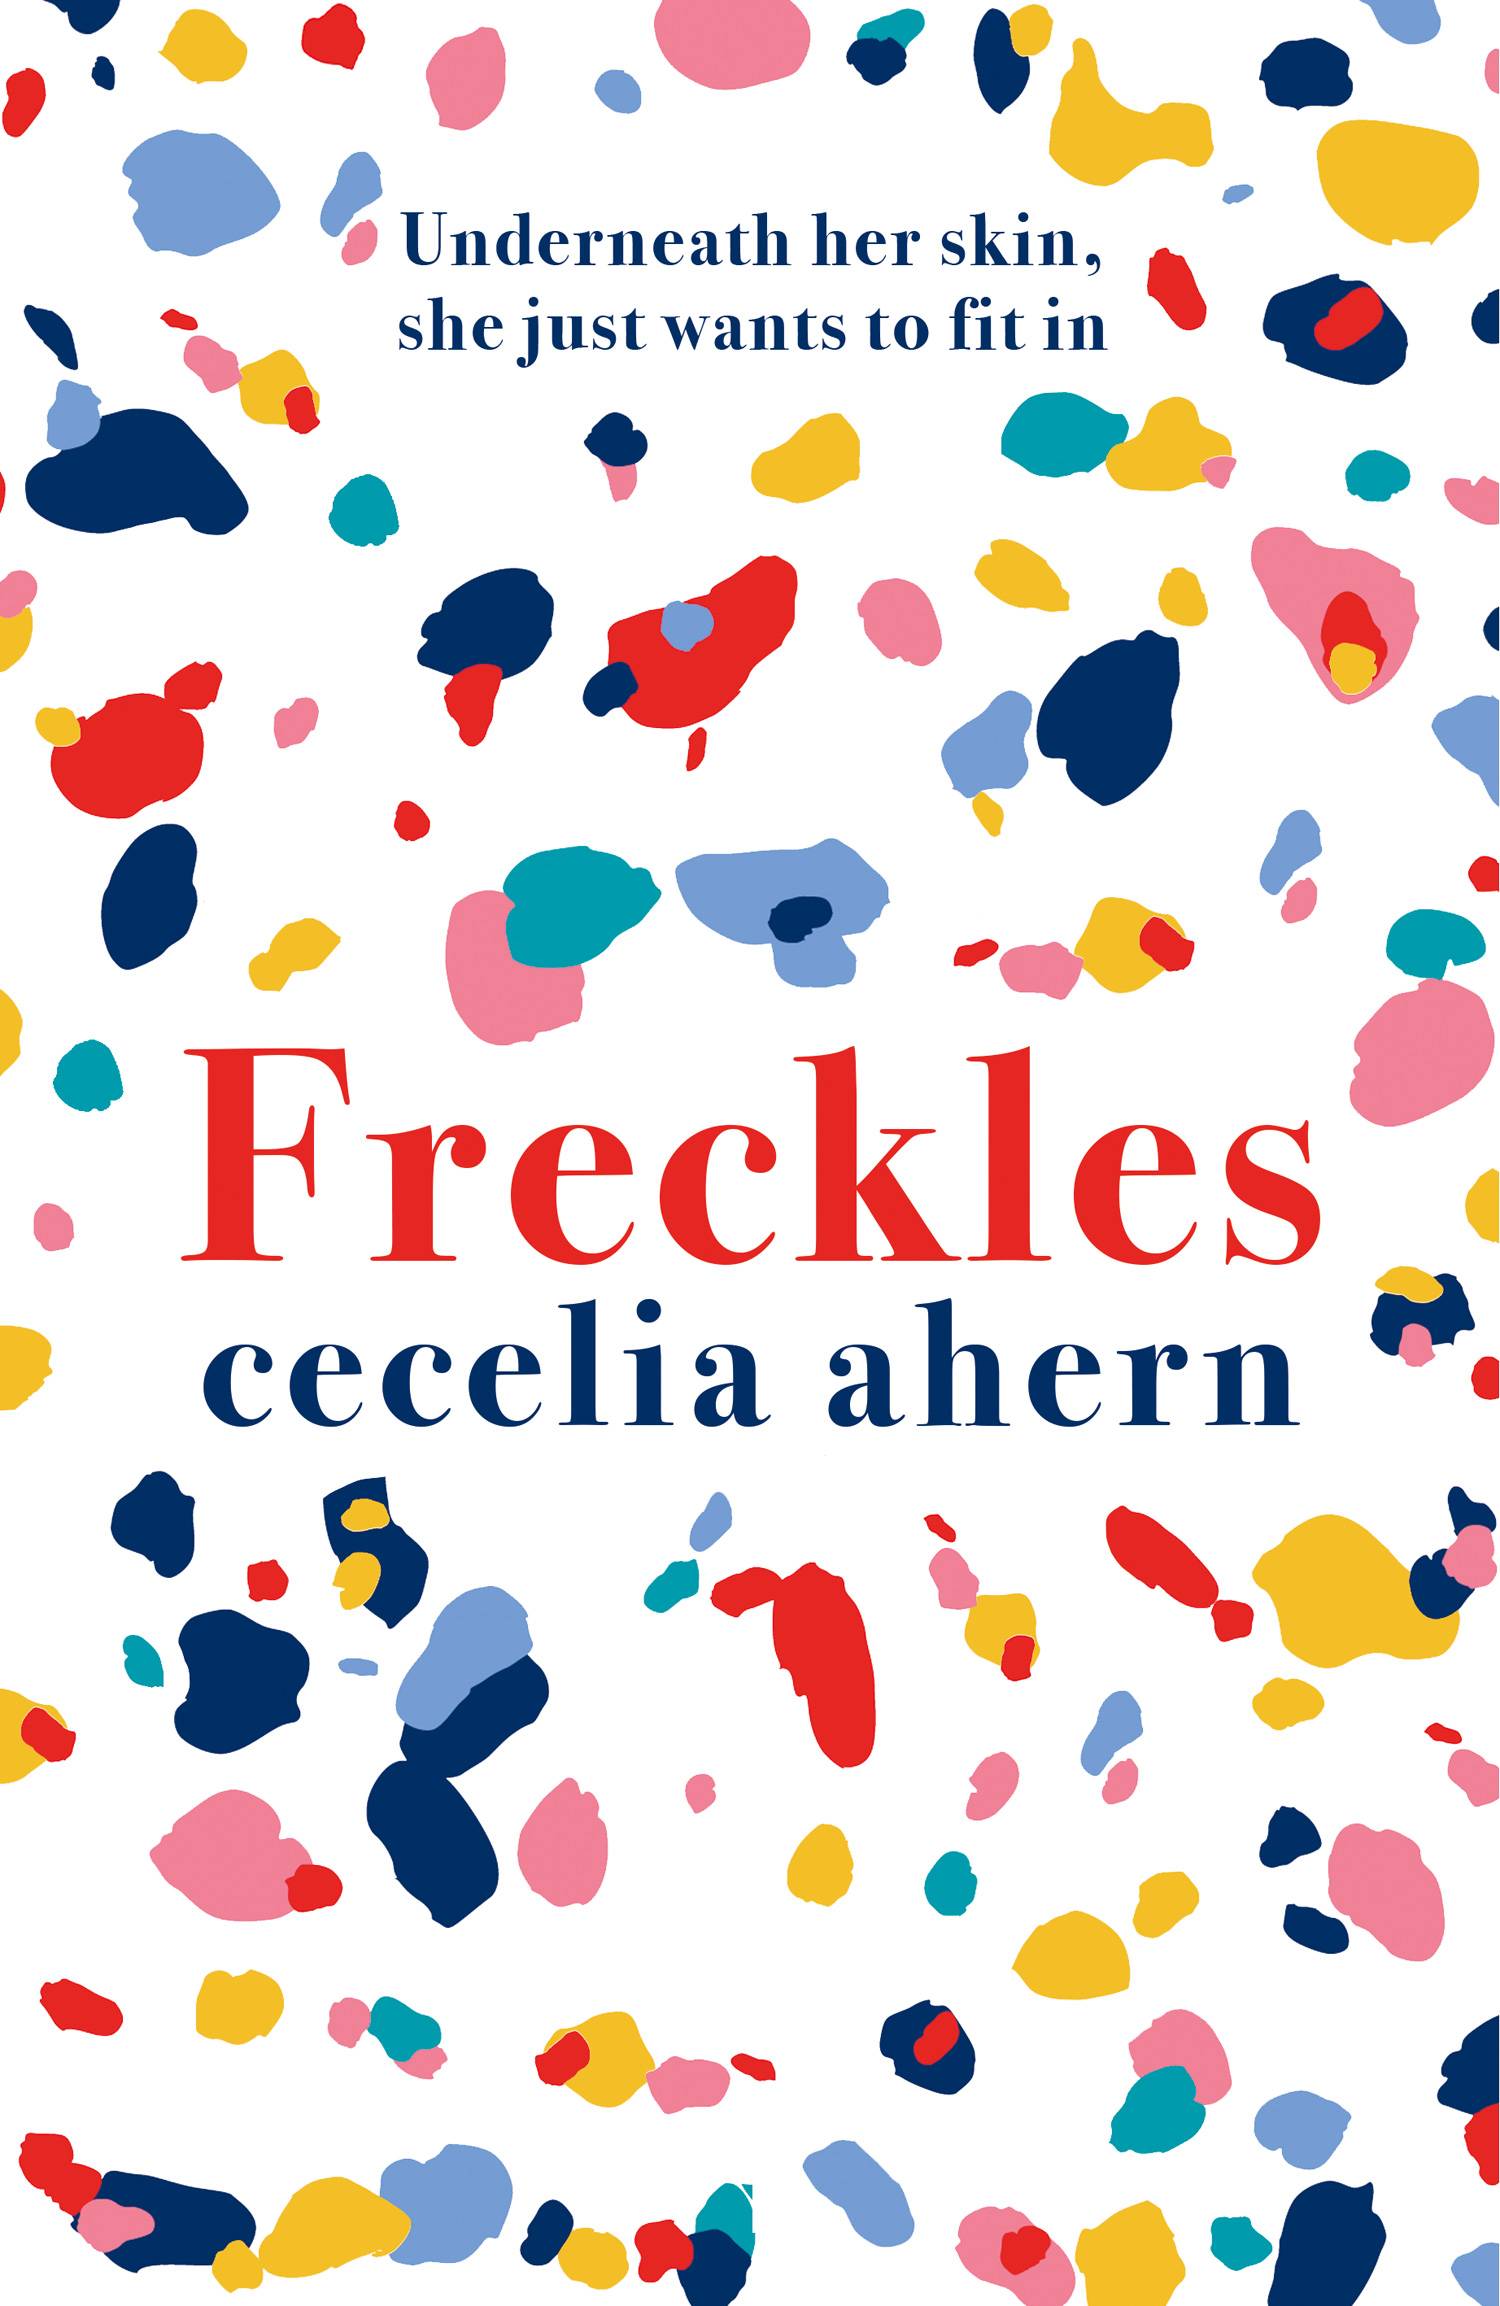 Celia Ahern's Freckles book cover